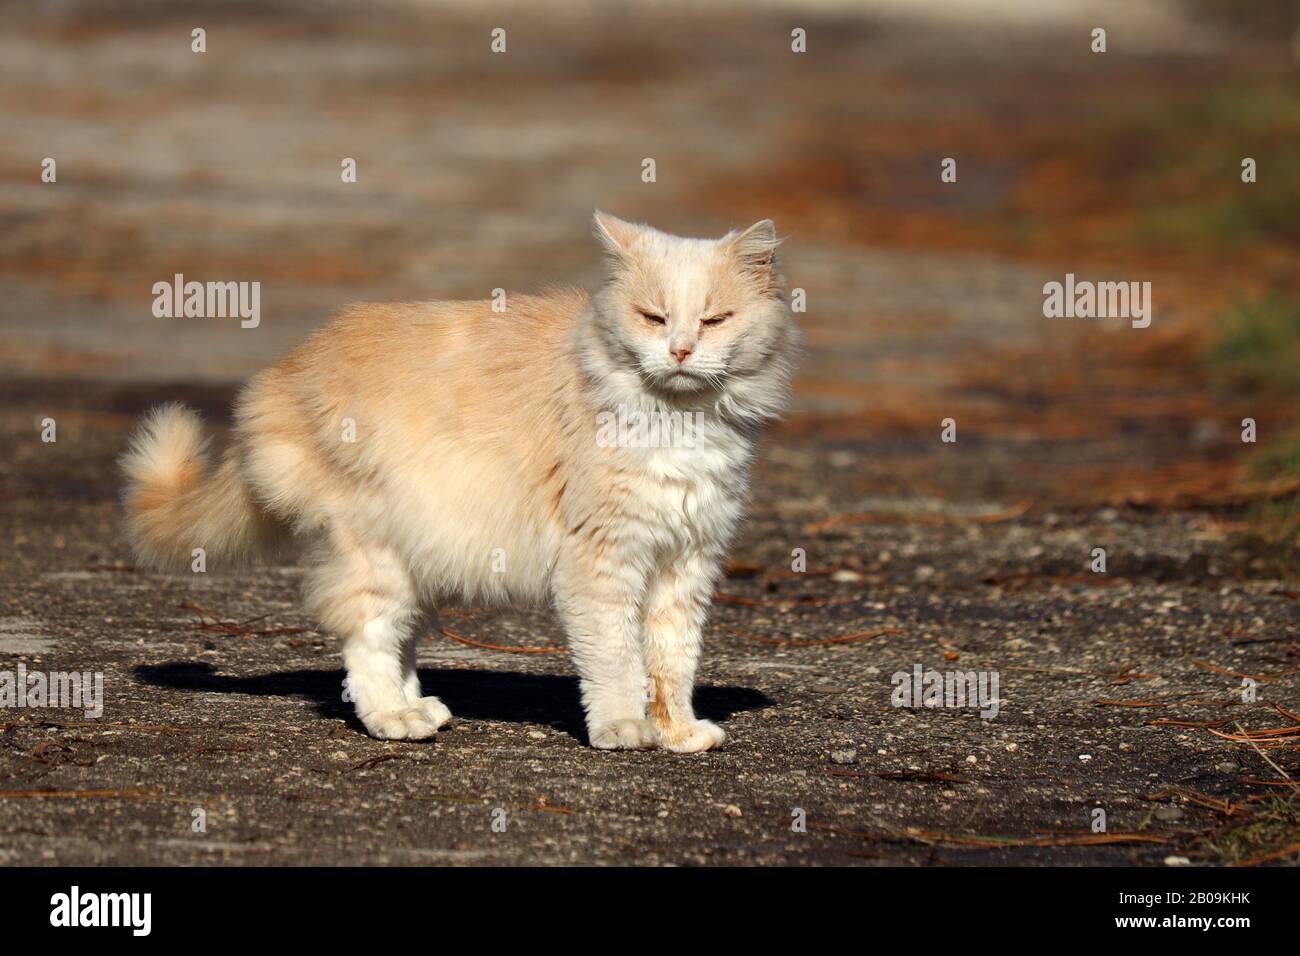 Ginger cat walking on a street in sunlight and squinting in the sun. Furry pet looking at camera, spring season Stock Photo